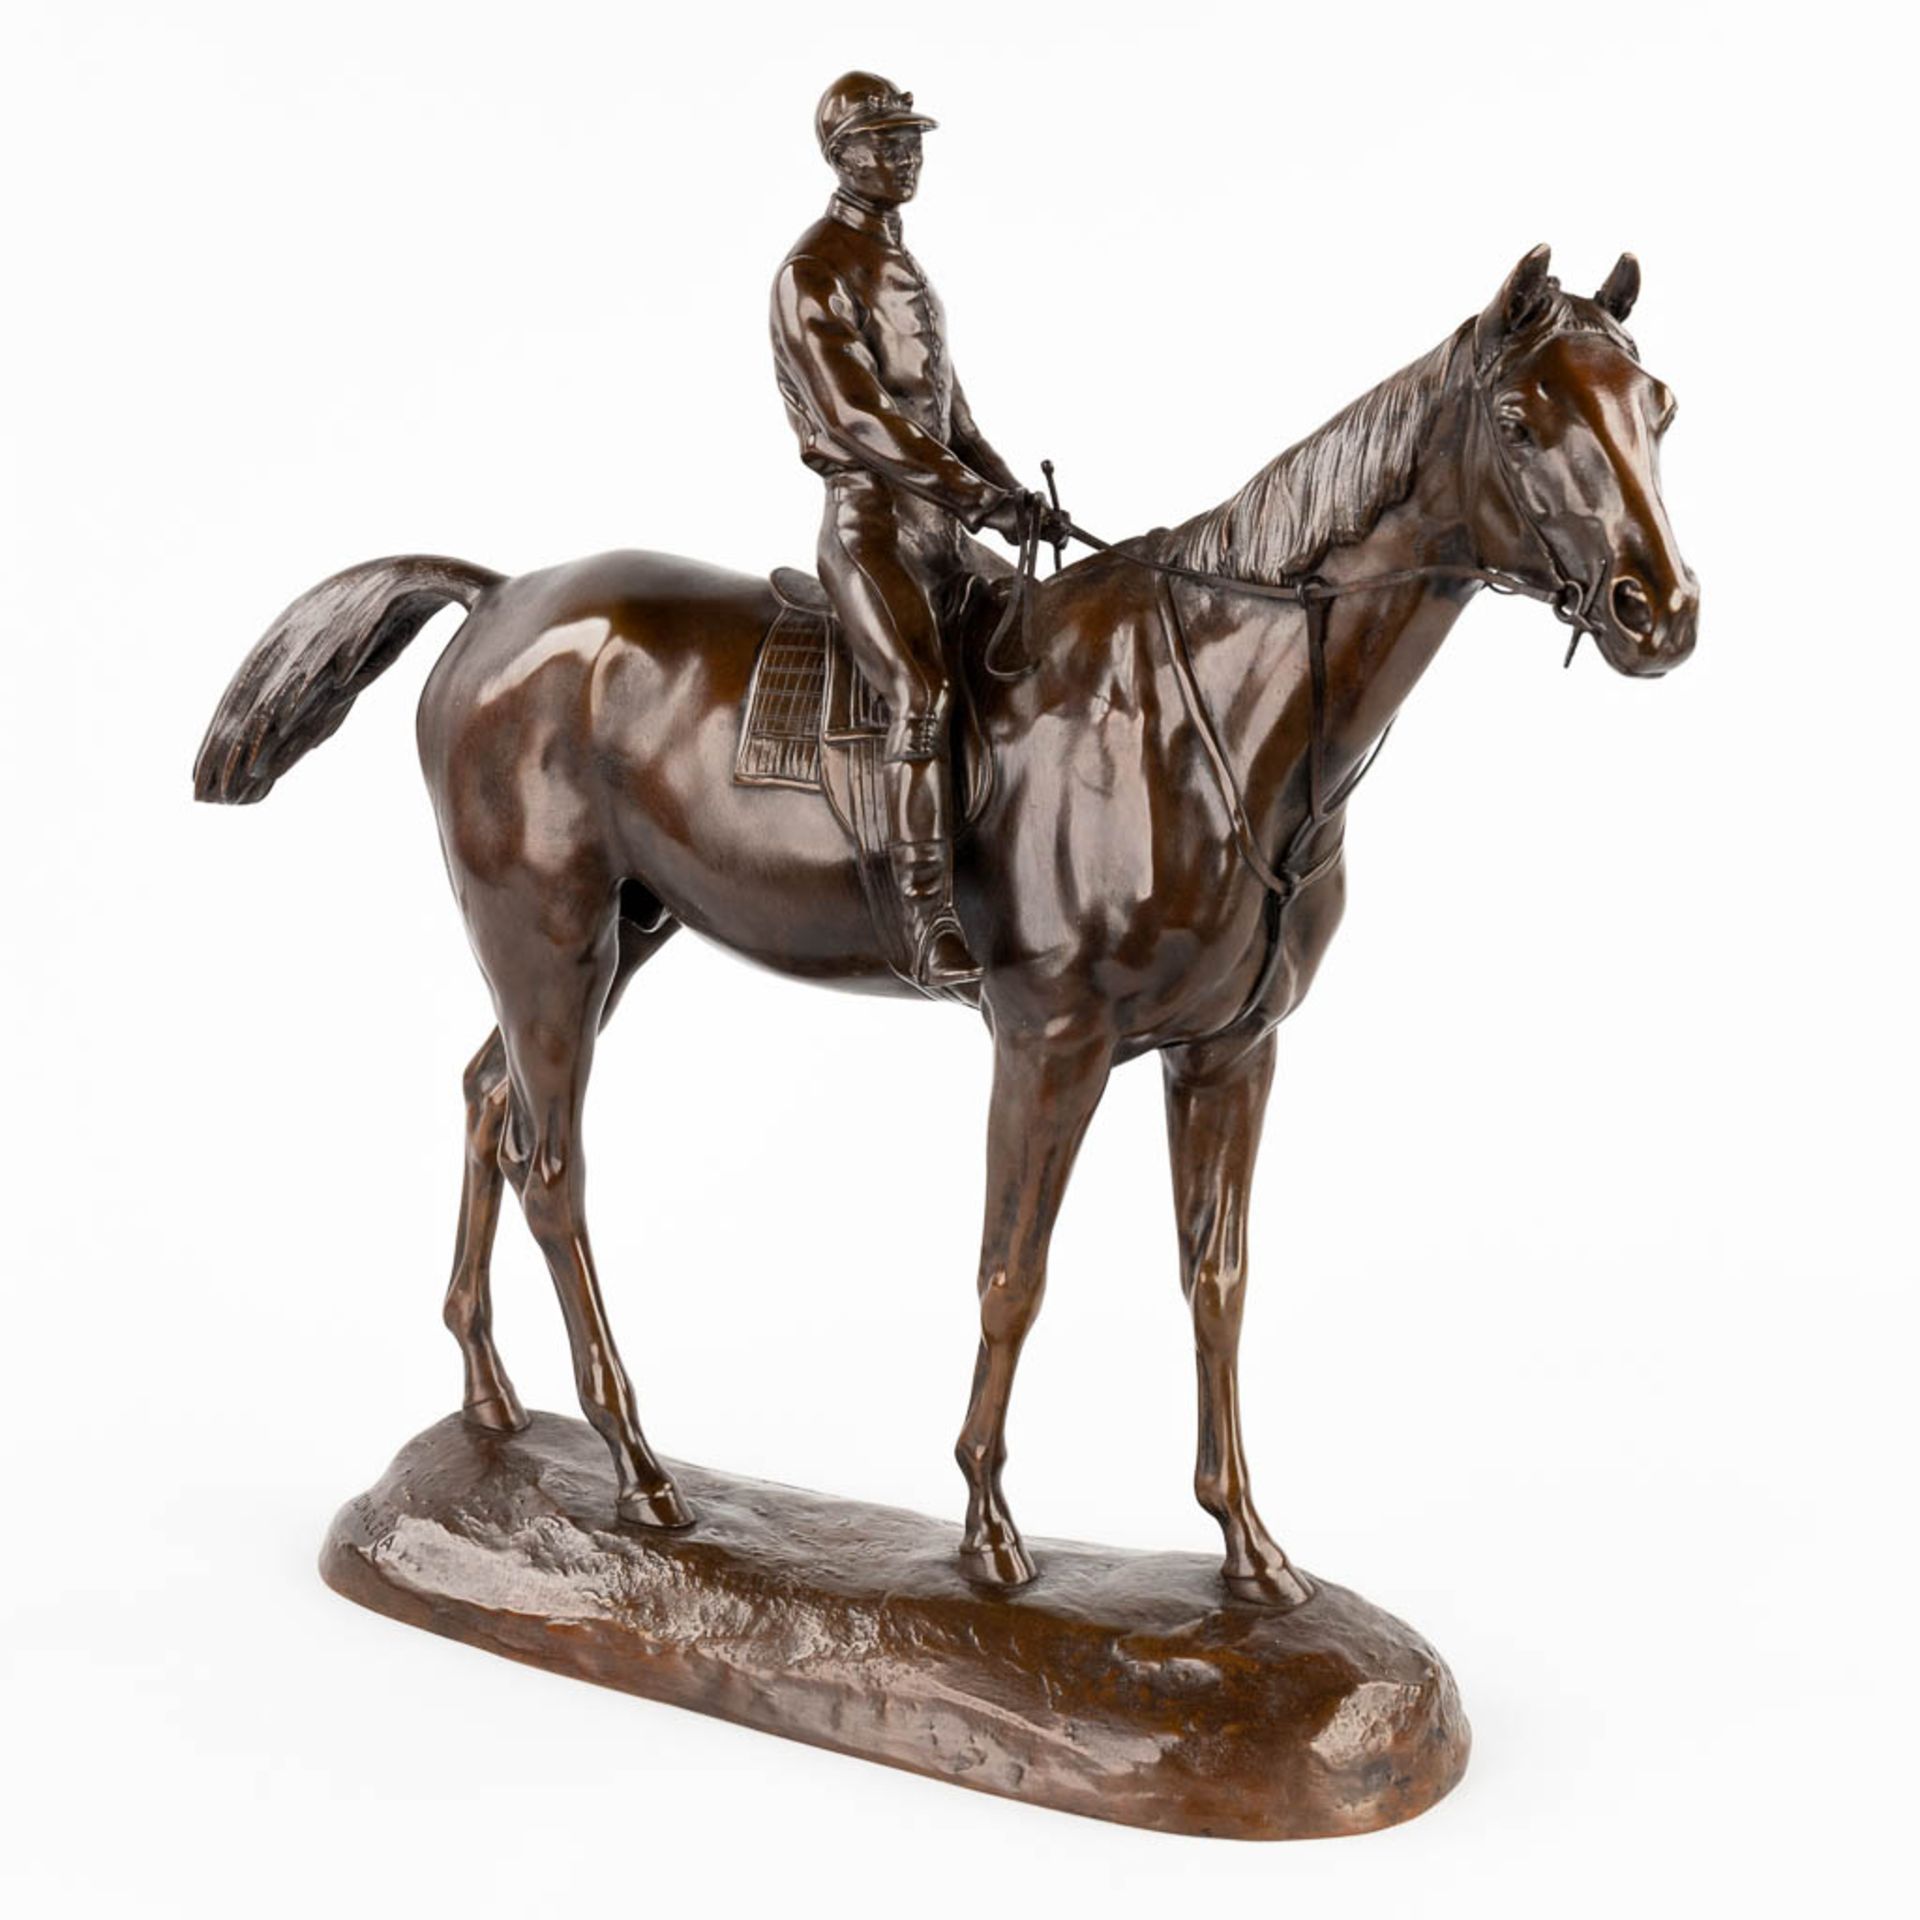 Paul COMOLÉRA (1818-c.1897) 'Horse with rider' patinated bronze. (L: 12 x W: 50 x H: 46 cm)